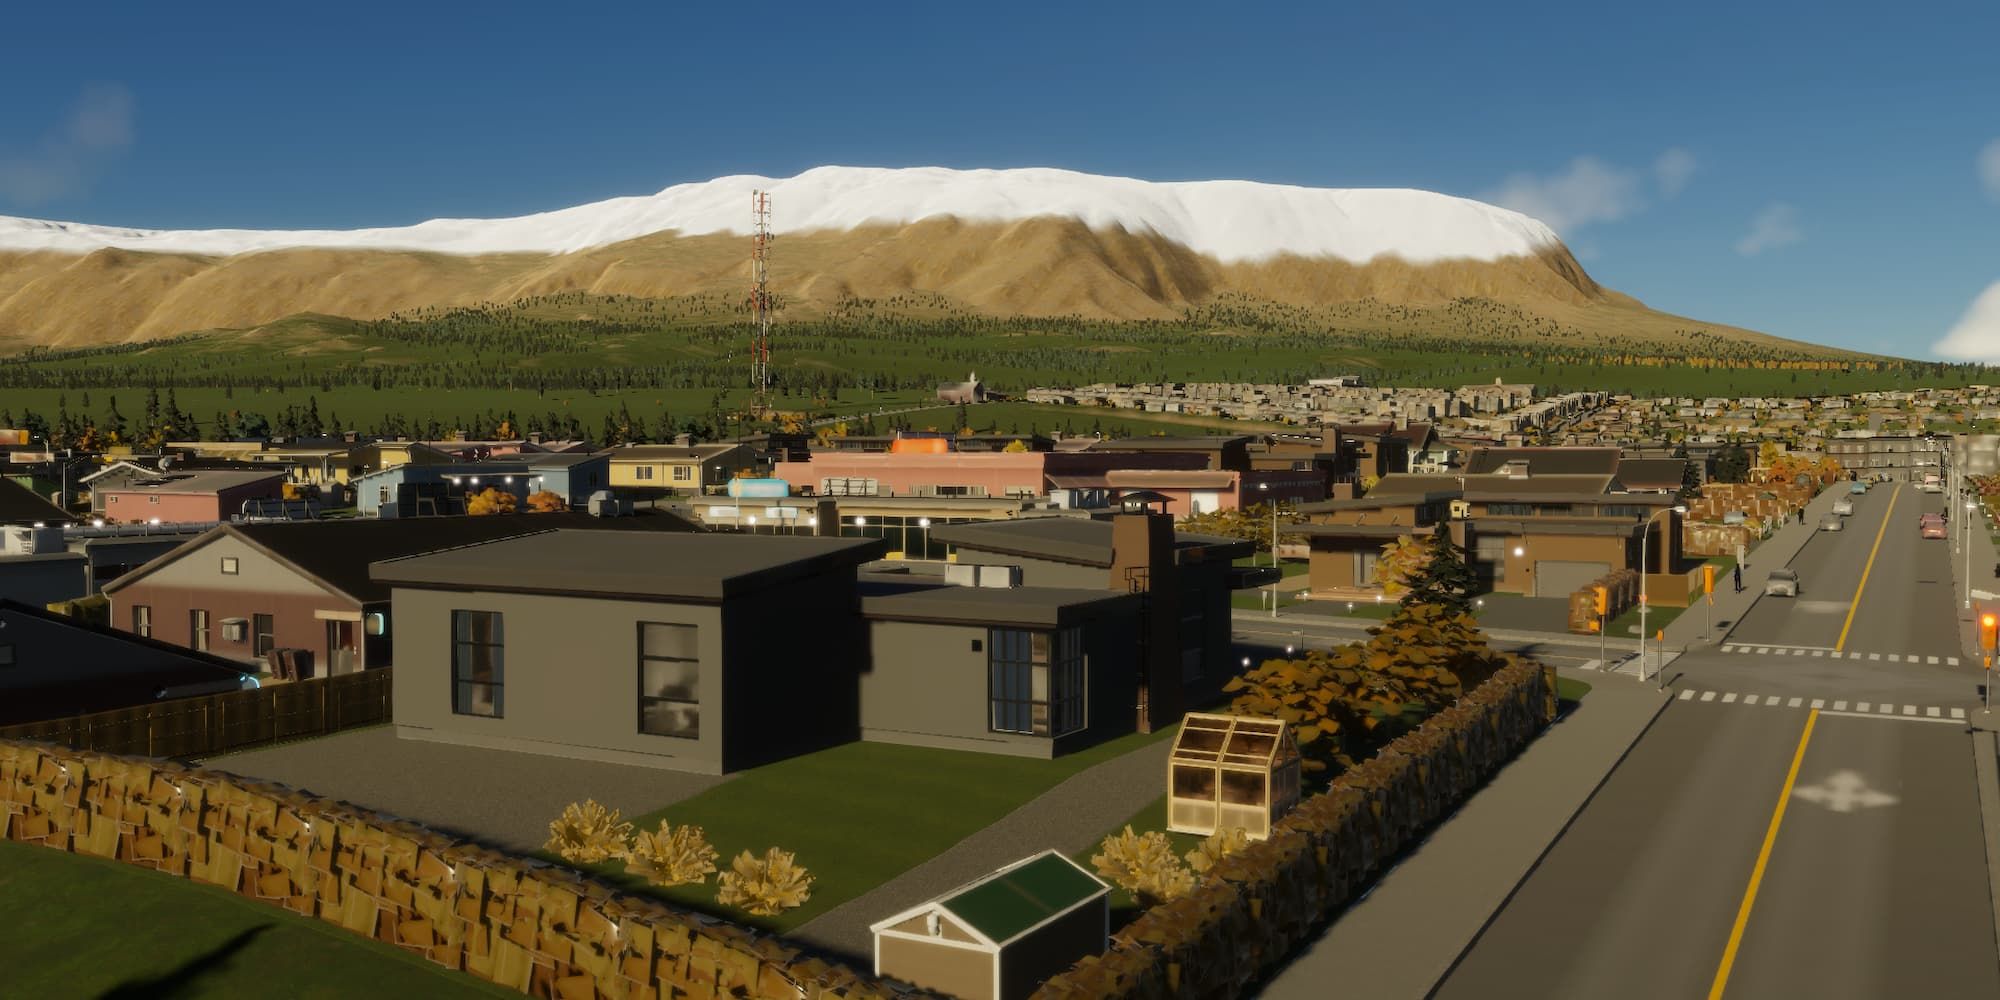 Cities: Skylines 2 - How To Deal With Abandoned Buildings